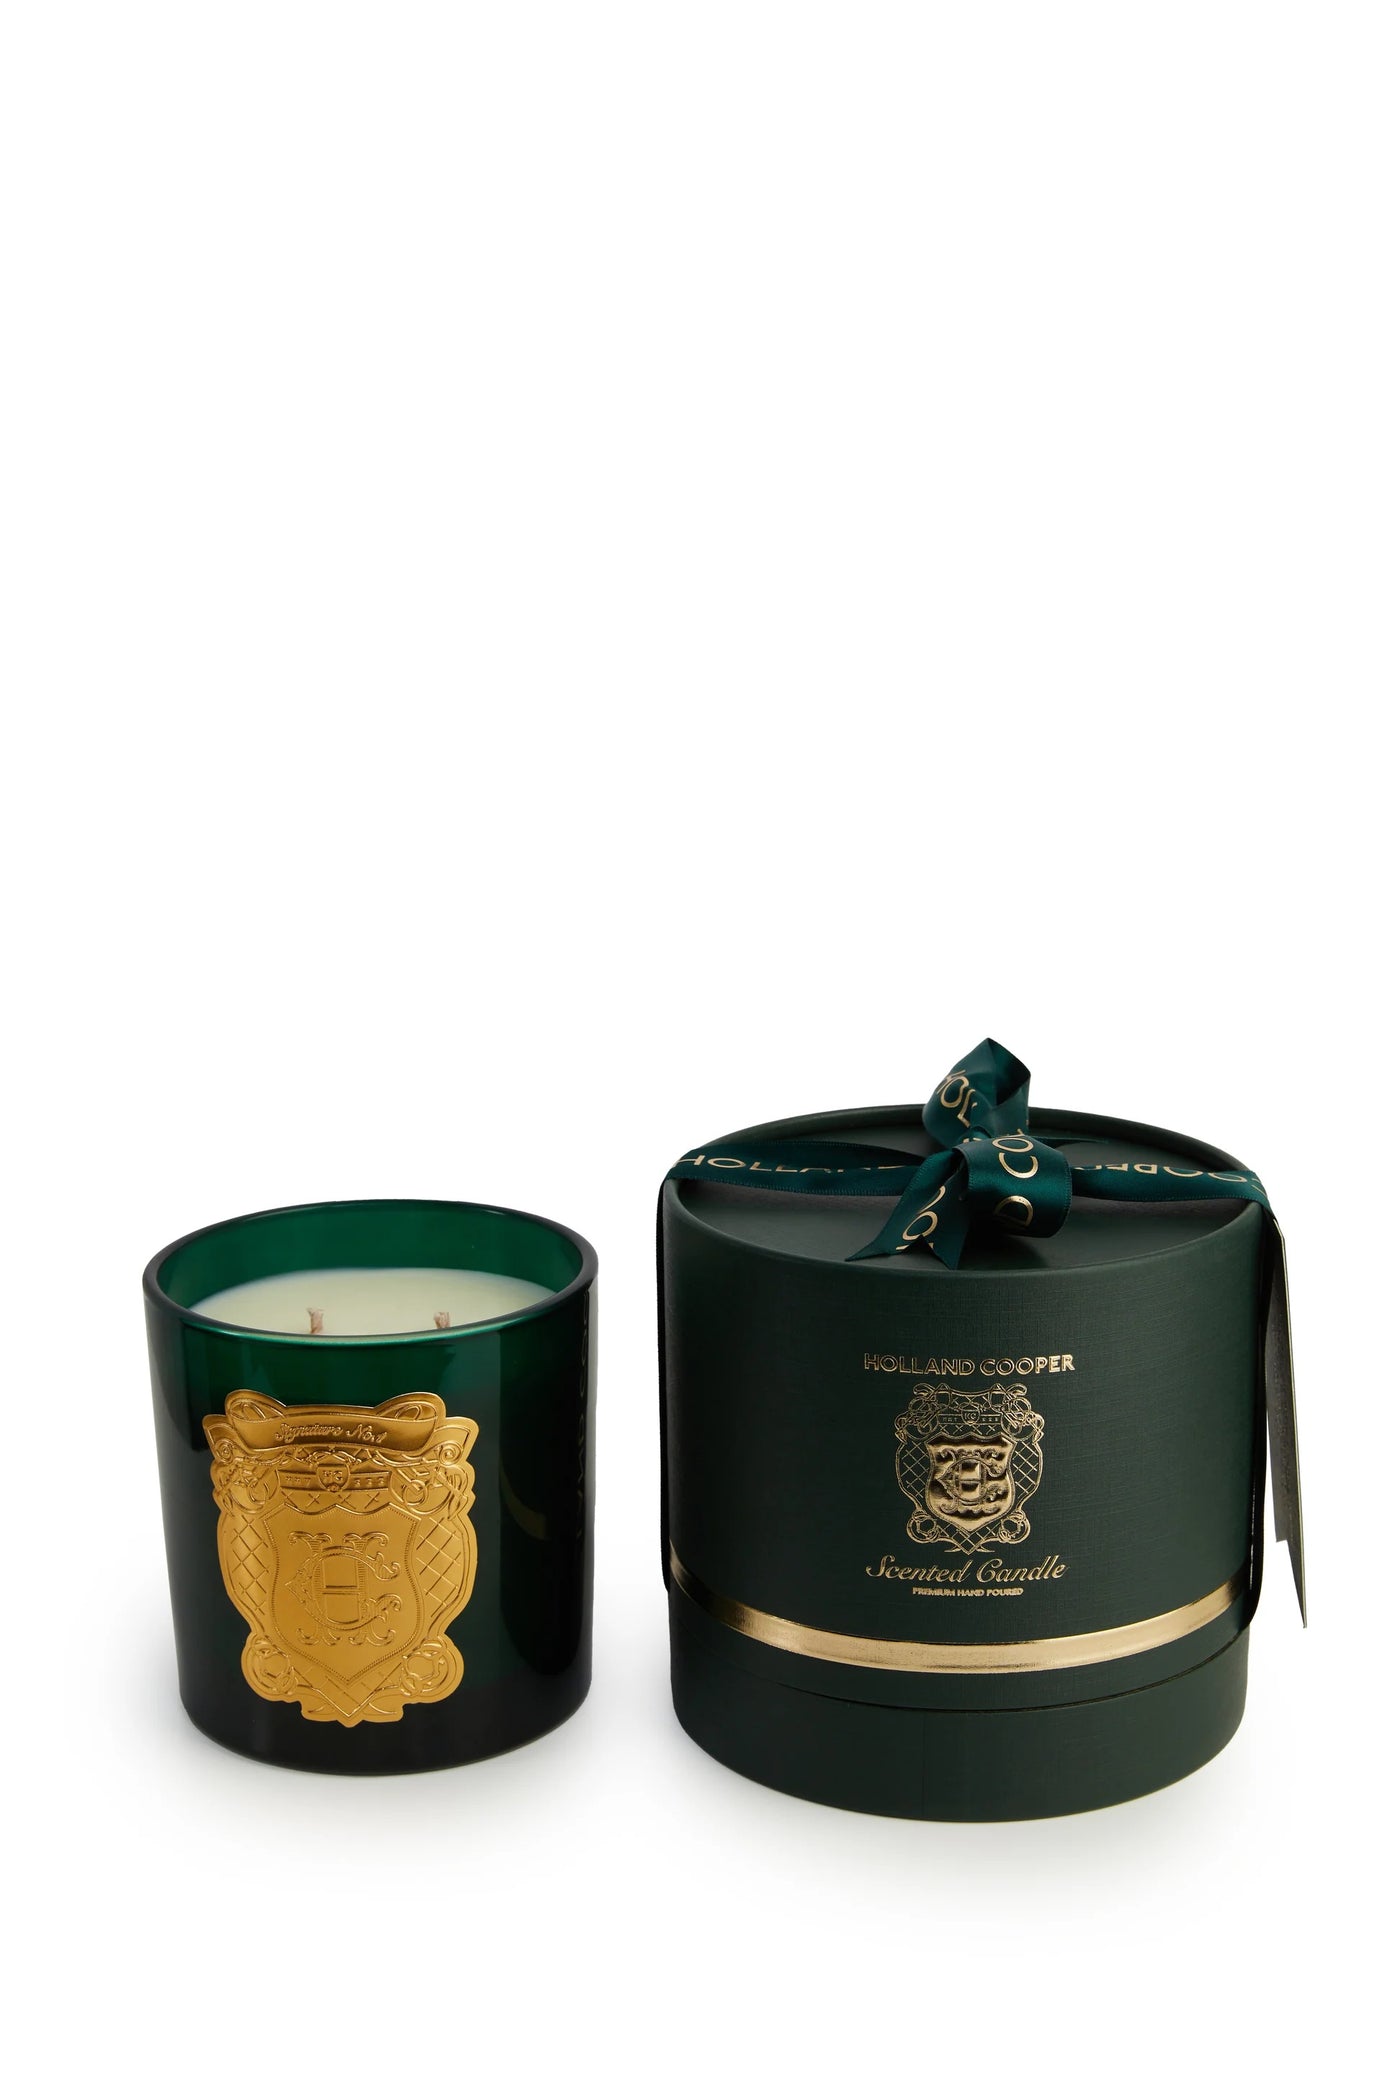 Holland Cooper Double Wick Candle in Signature No 1 Open Box